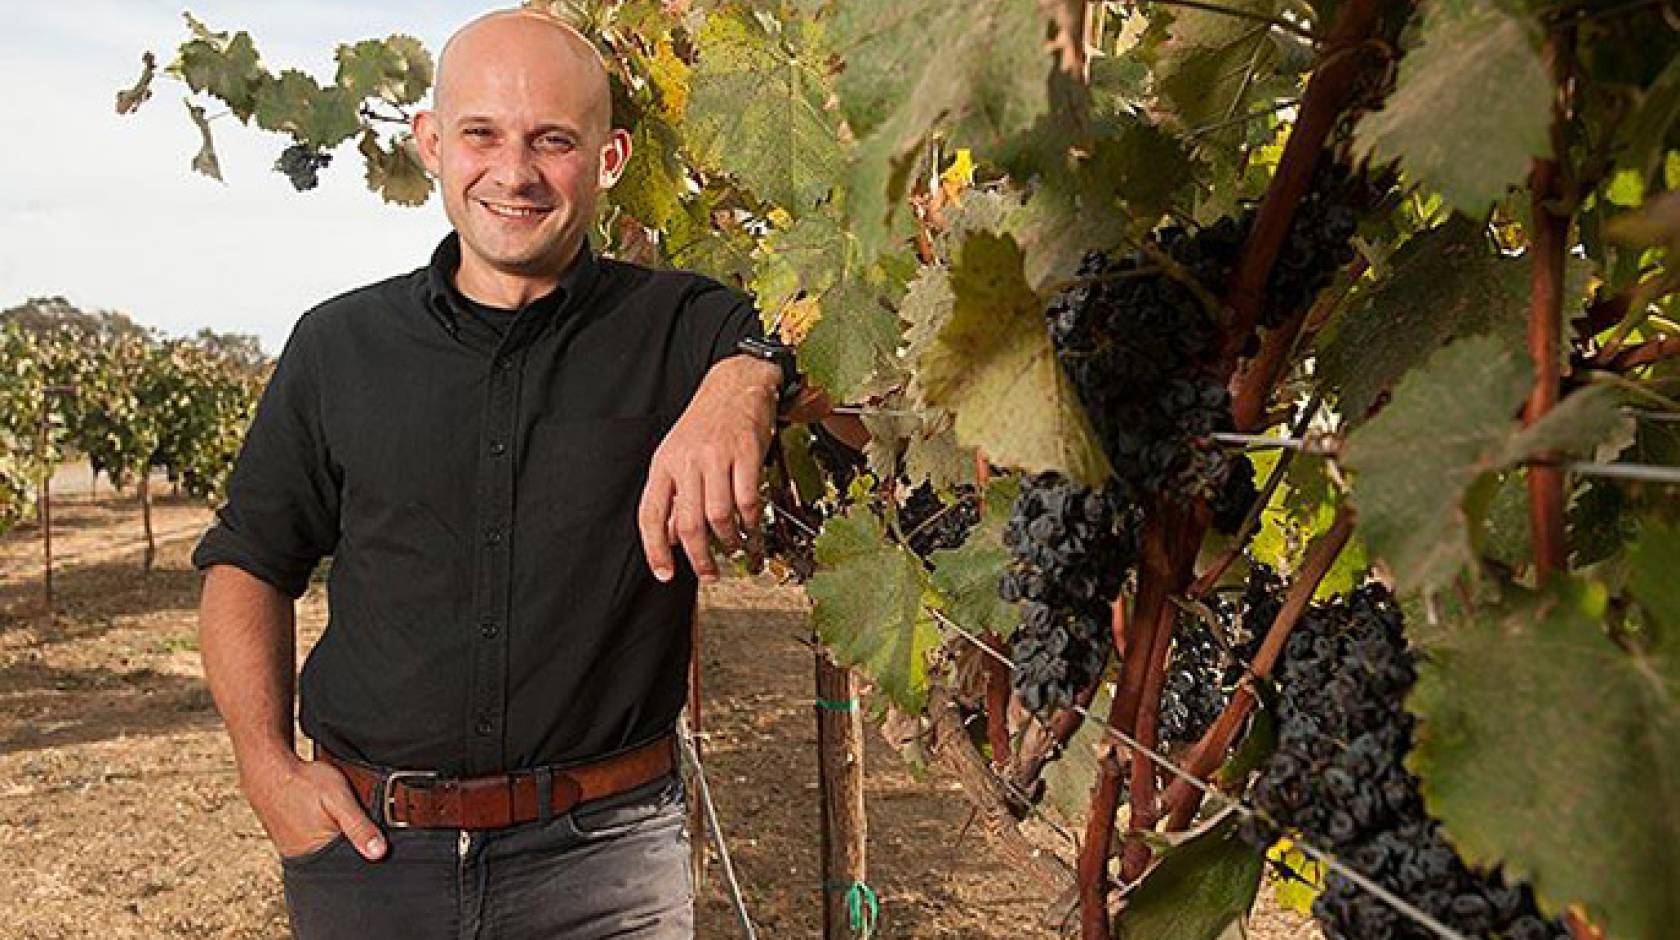 UC Davis plant geneticist Dario Cantu used a new sequencing technology and computer algorithm to produce a high-quality draft genome sequence of the cabernet sauvignon wine grape. 